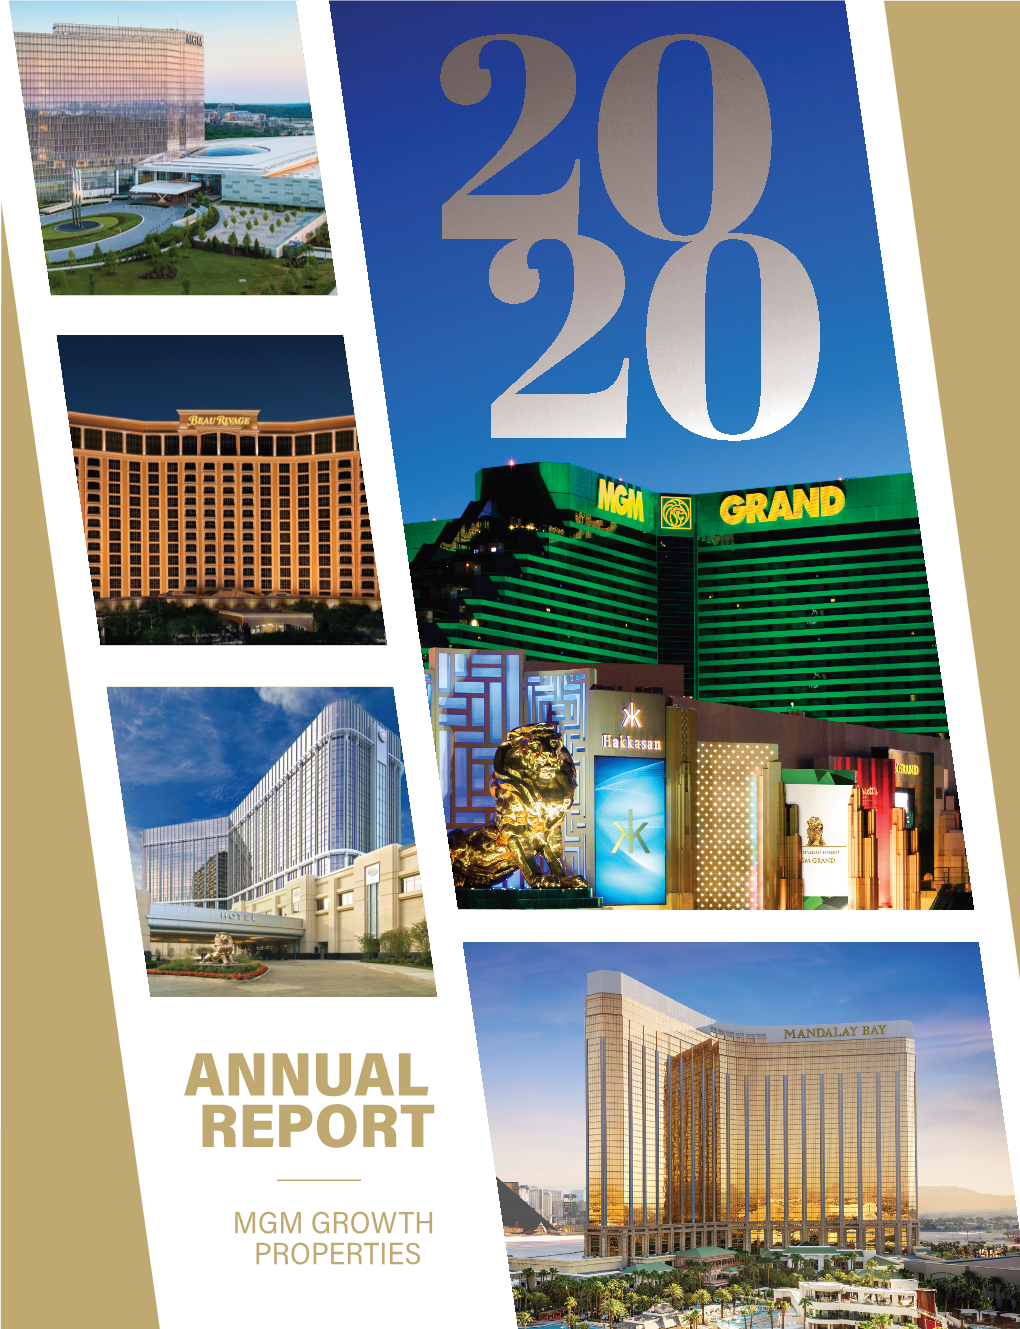 Mgm Growth Properties Year in 2020 Review